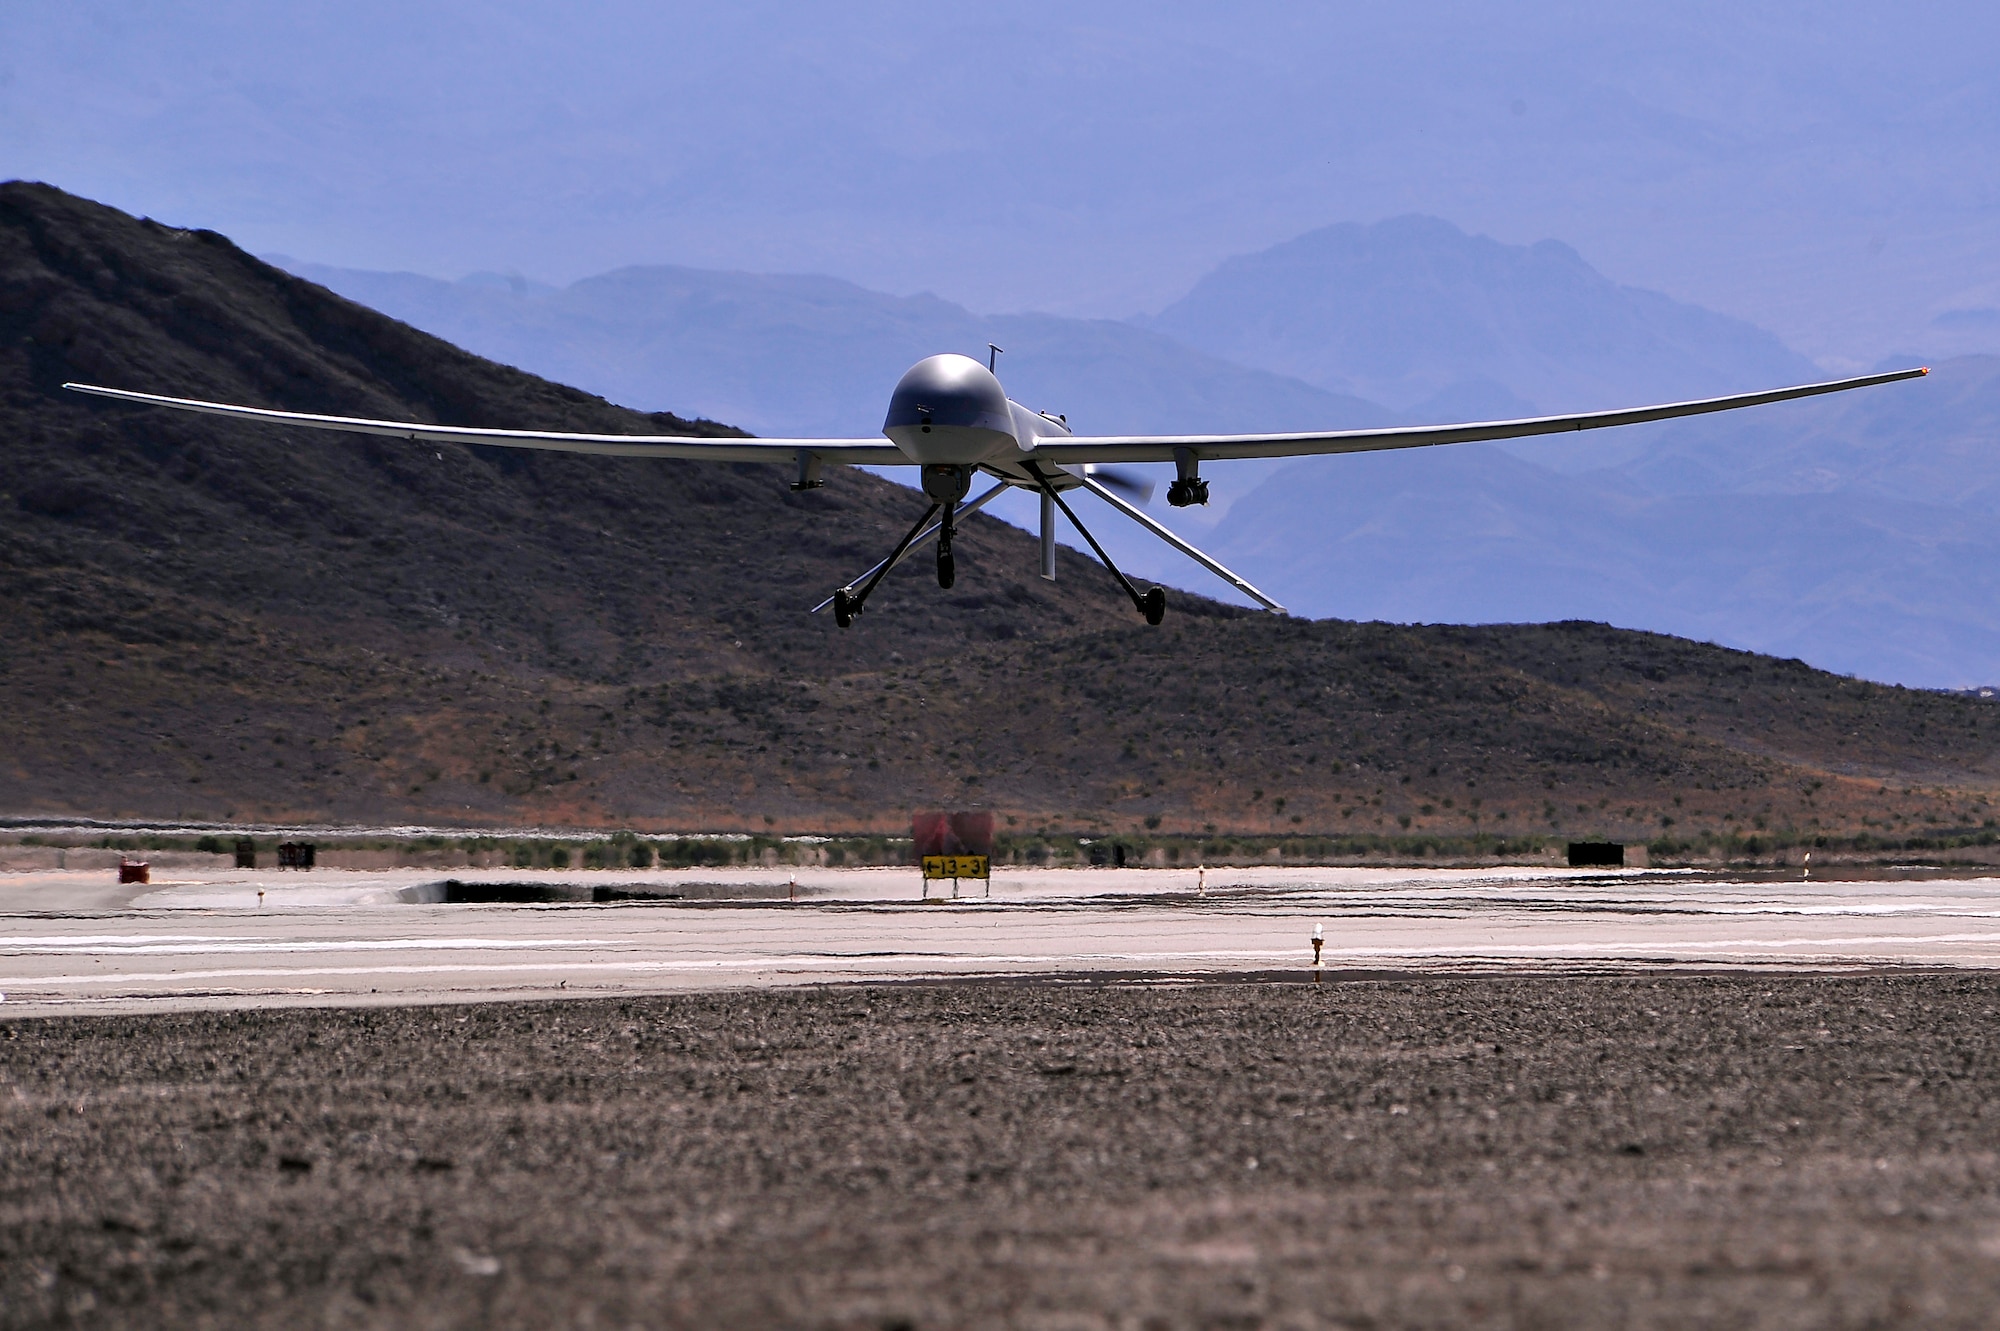 An MQ-1B Predator remotely piloted aircraft comes in for a 'touch-and-go' during a training mission